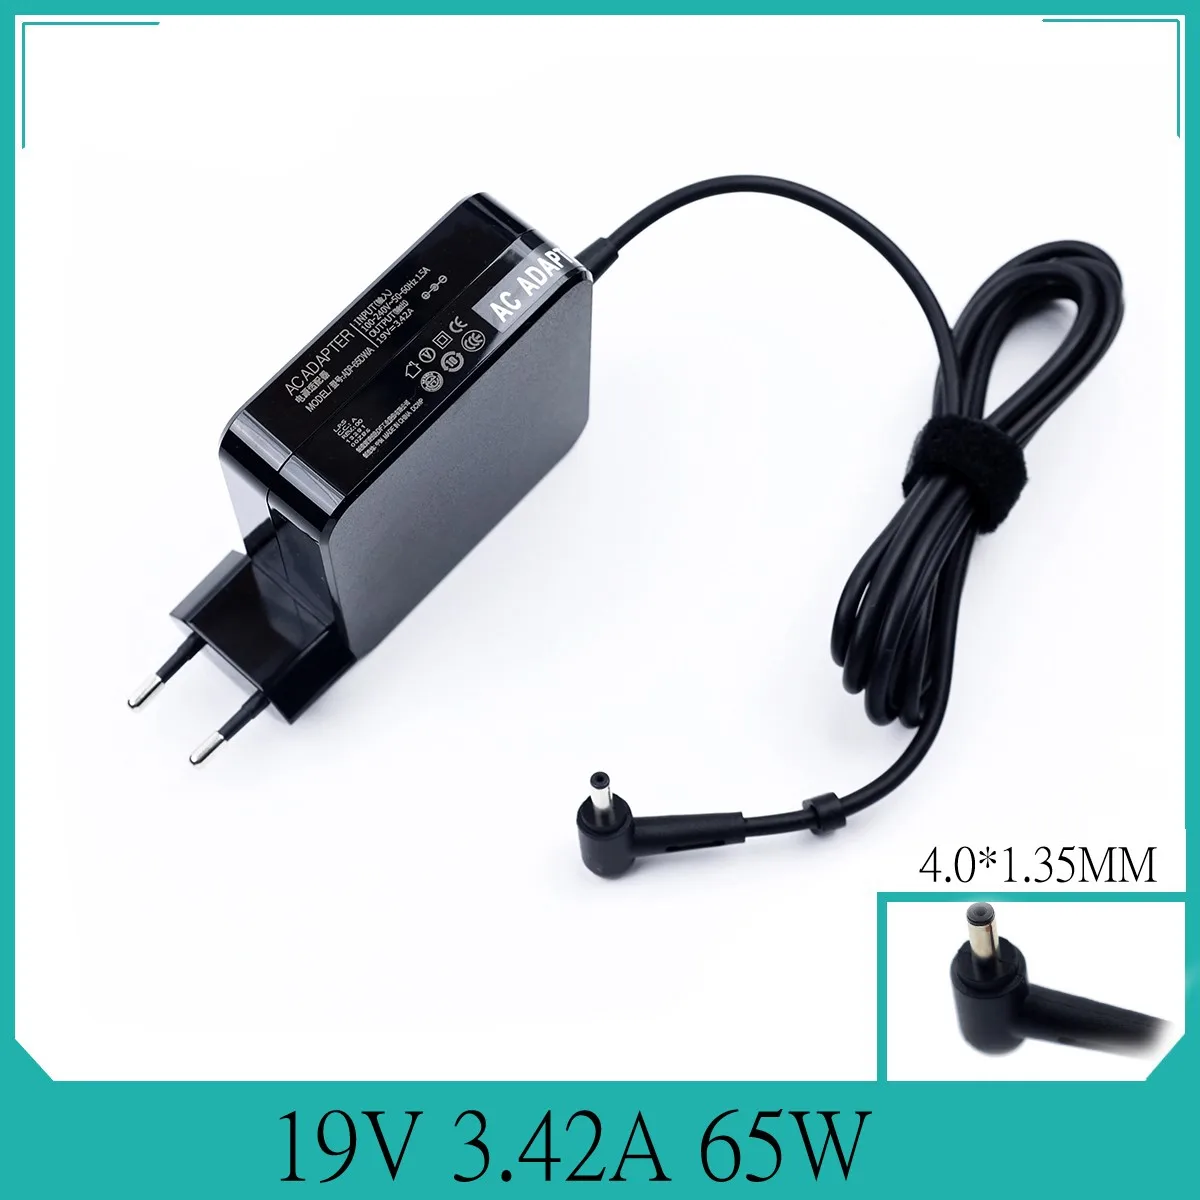 Laptop Adapter 19V 3.42A 65W 4.0*1.35mm ADP-65DW  AC Power Charger For Asus UX21 UX31A UX32A UX301 U38N UX42VS UX50 UX52VS